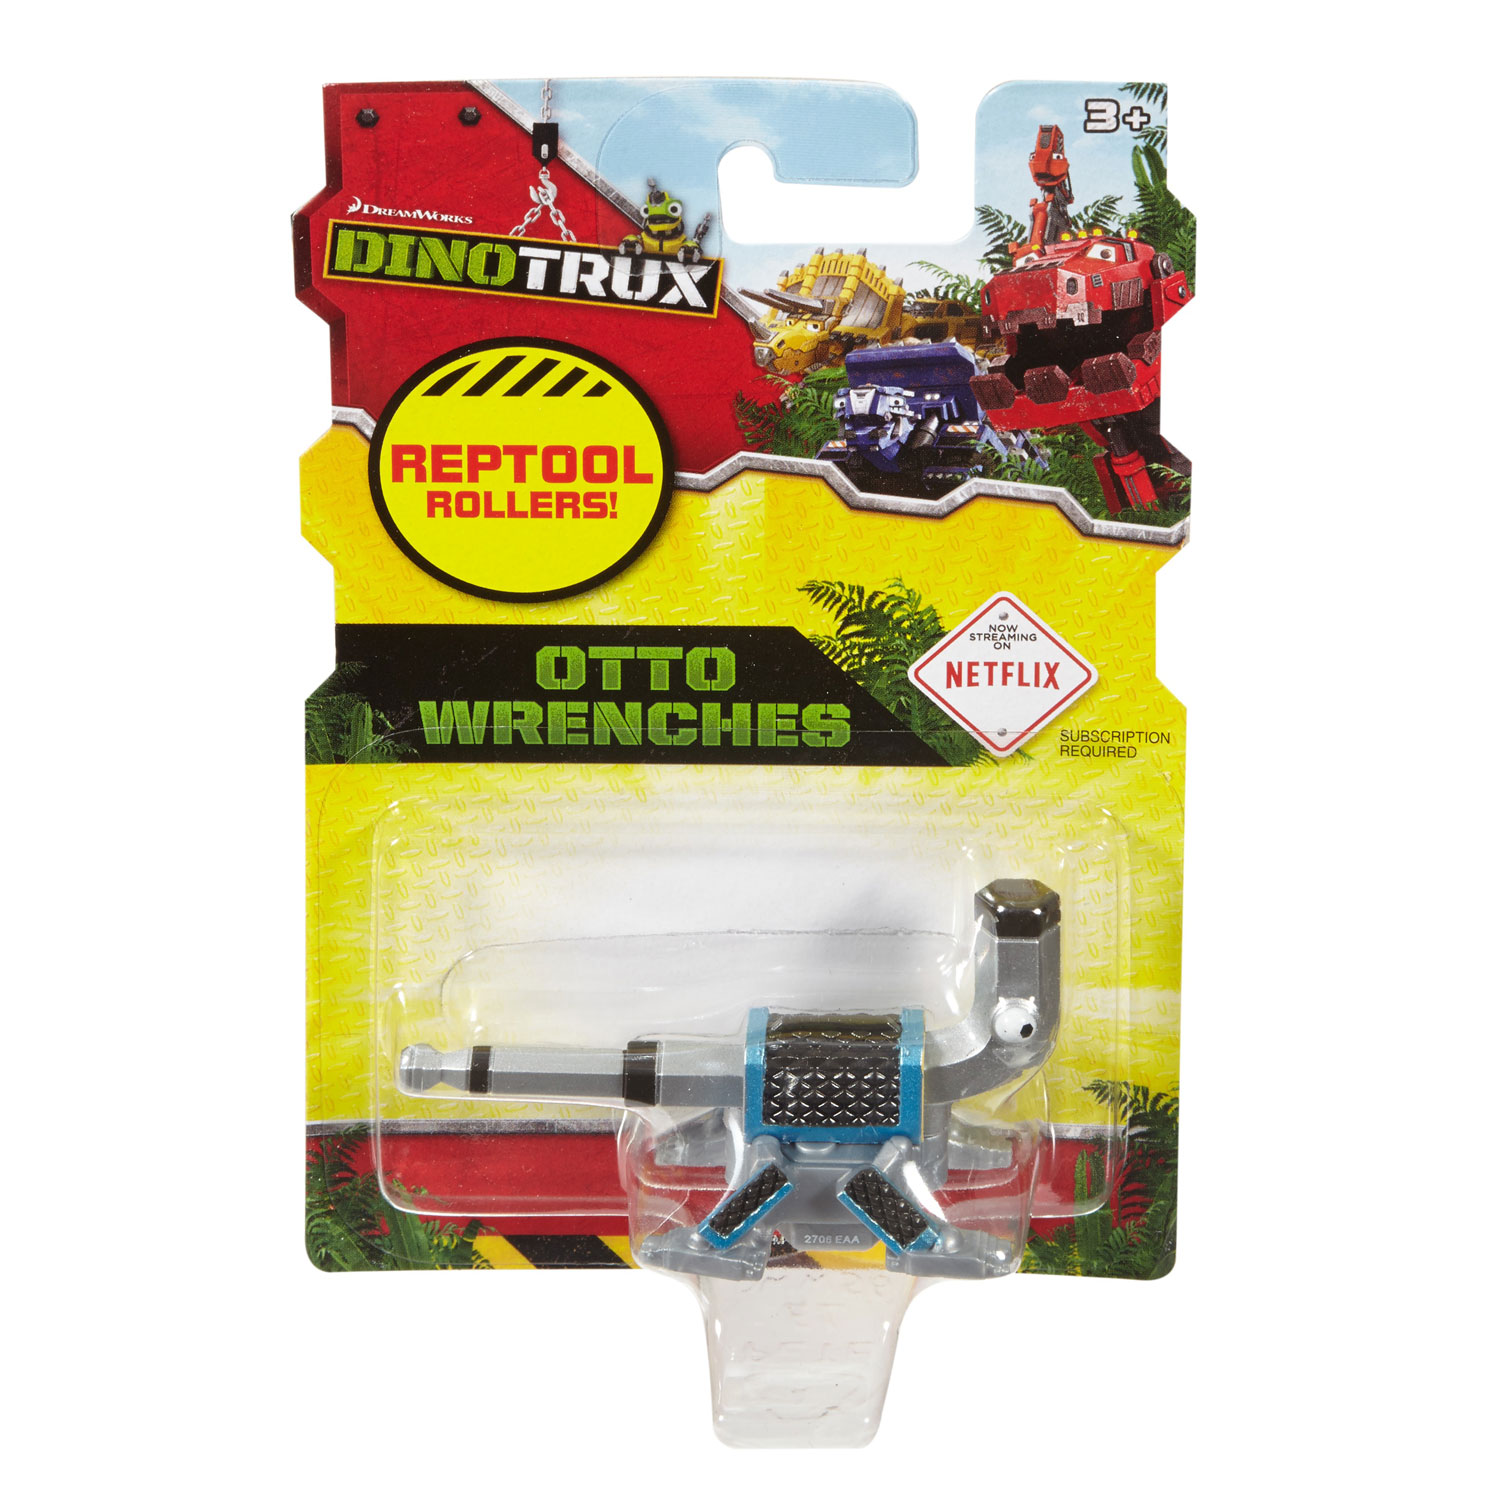 Dinotrux Reptool Rollers - Otto Wrenches